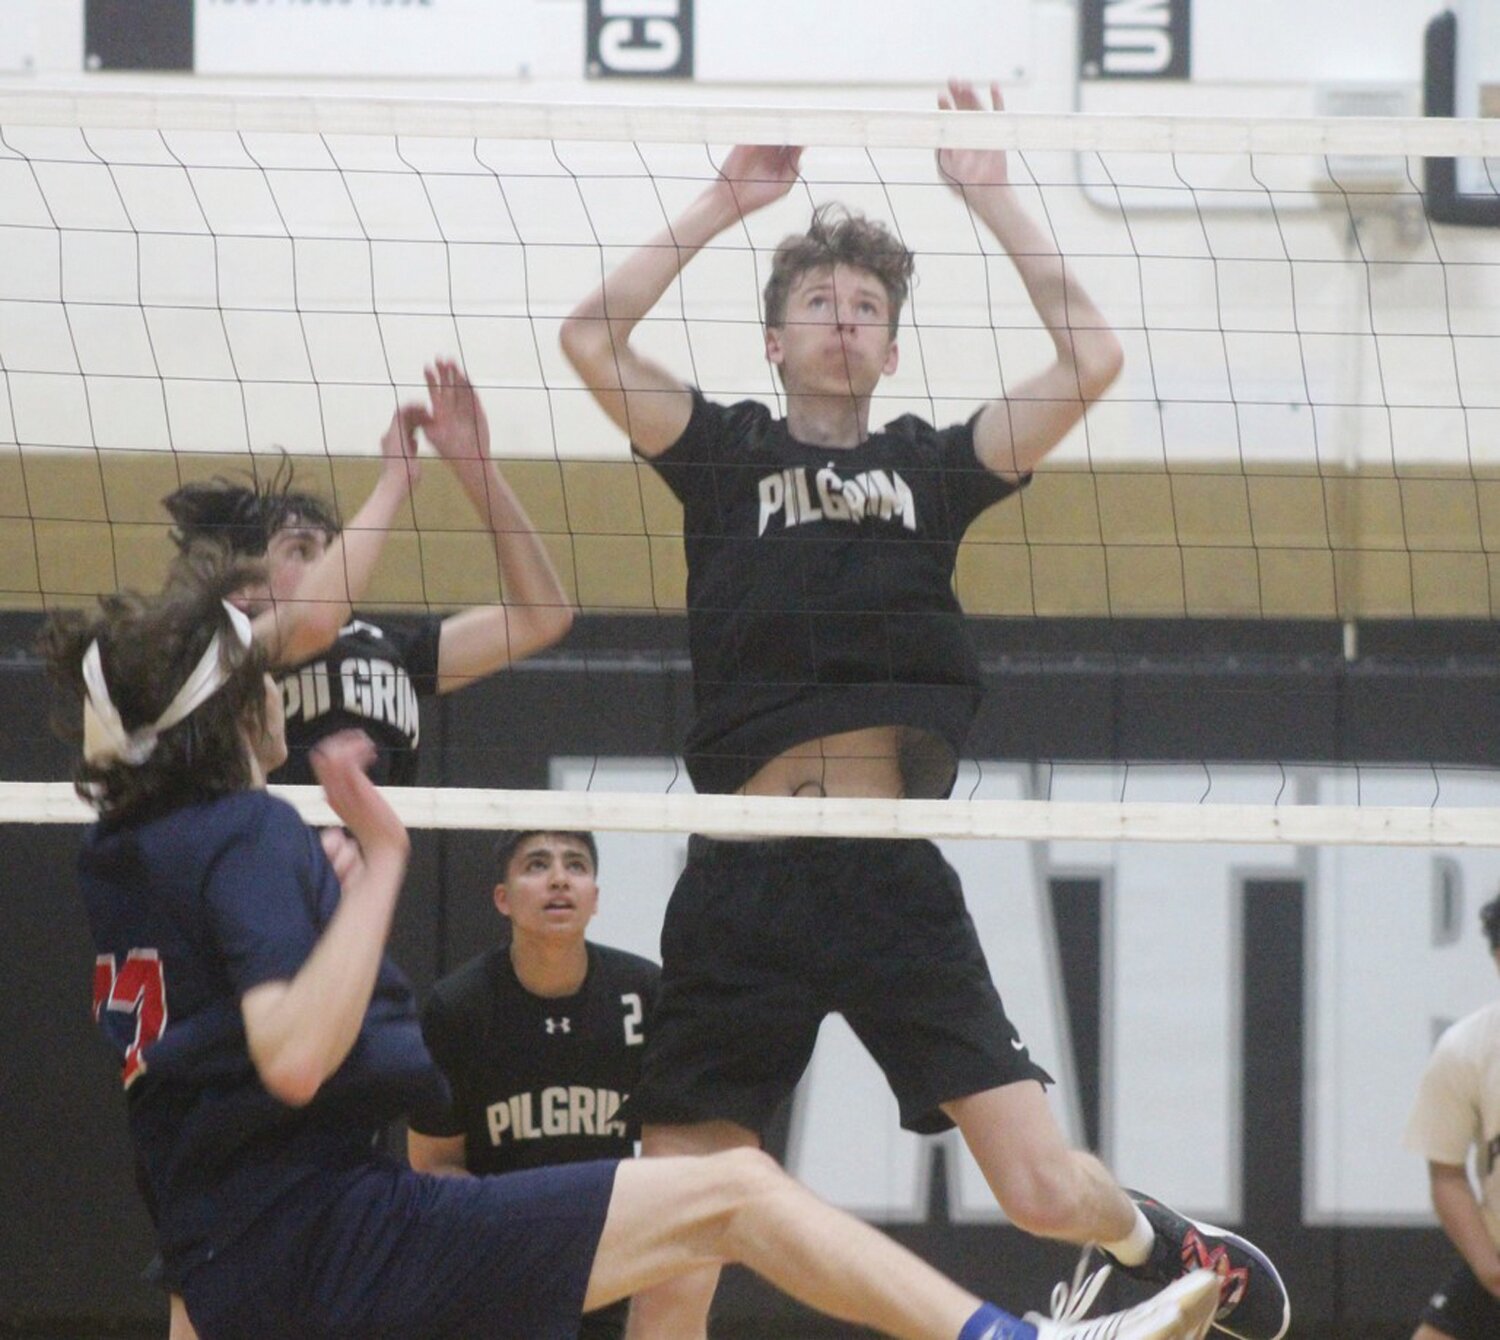 AT THE NET: Pilgrim’s Declan Faherty makes a play.